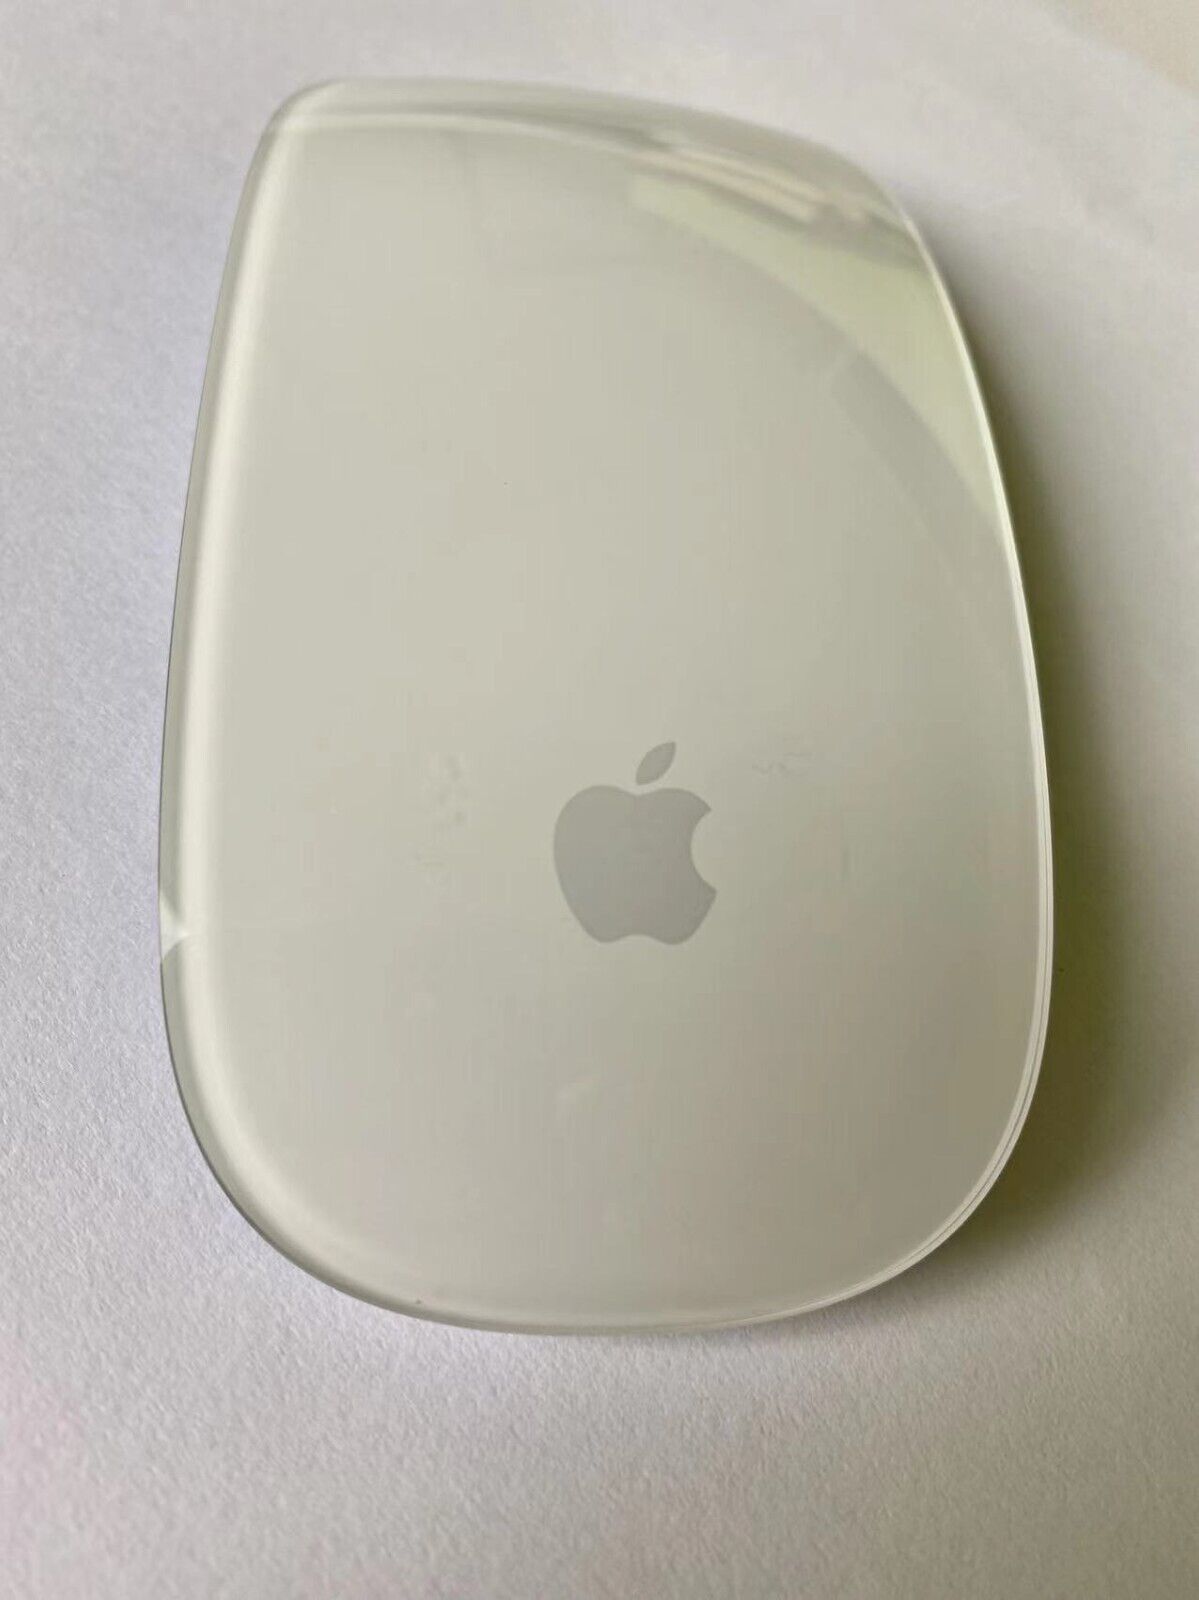 Apple Magic Mouse Version 2 A1657 Bluetooth Wireless - MLA02LL/ NO CABLE BLUE